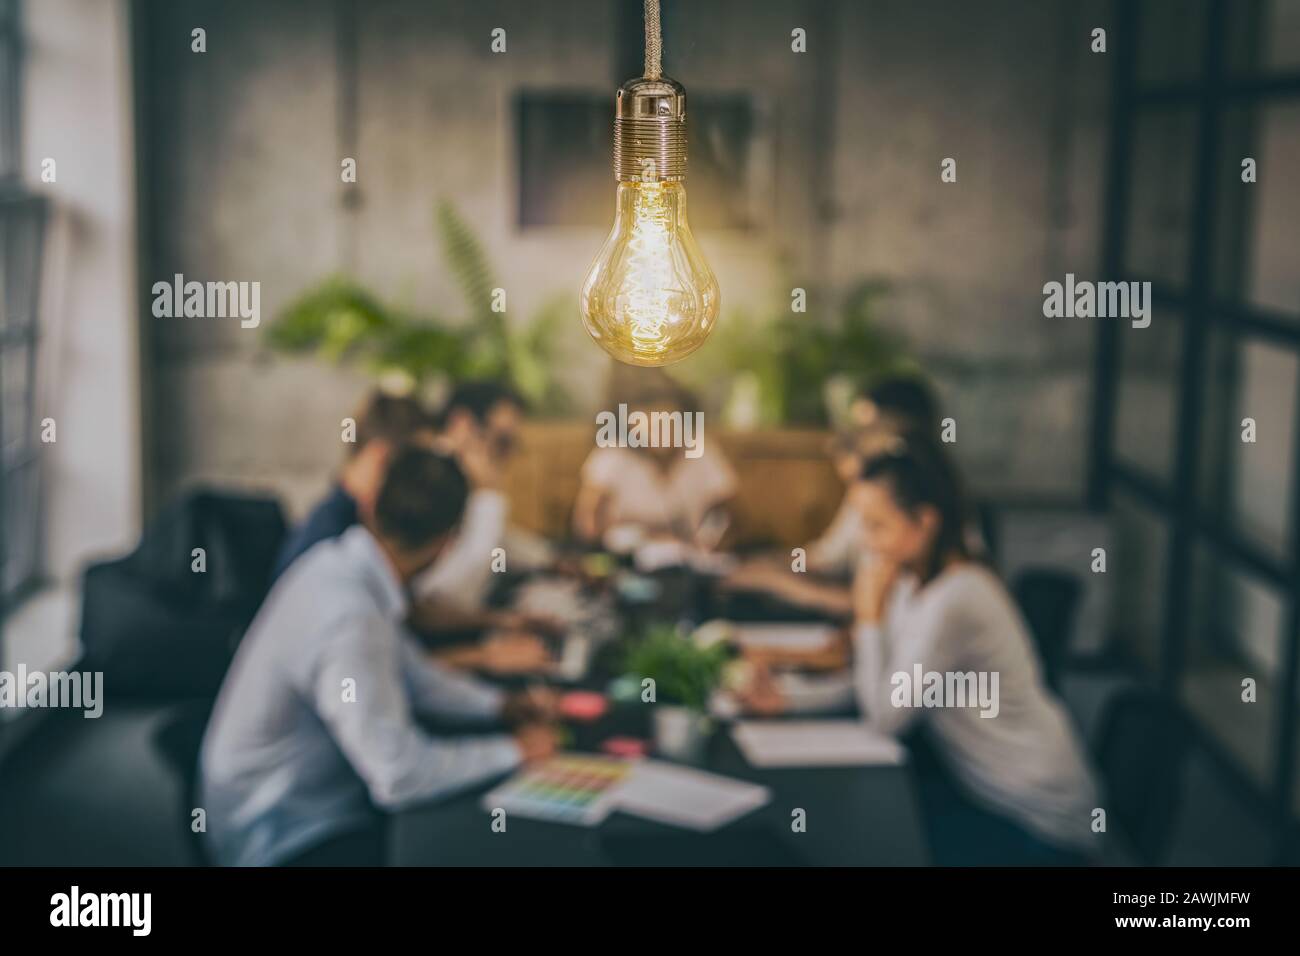 Young business people are discussing together a new startup project. A glowing light bulb as a new idea. Stock Photo